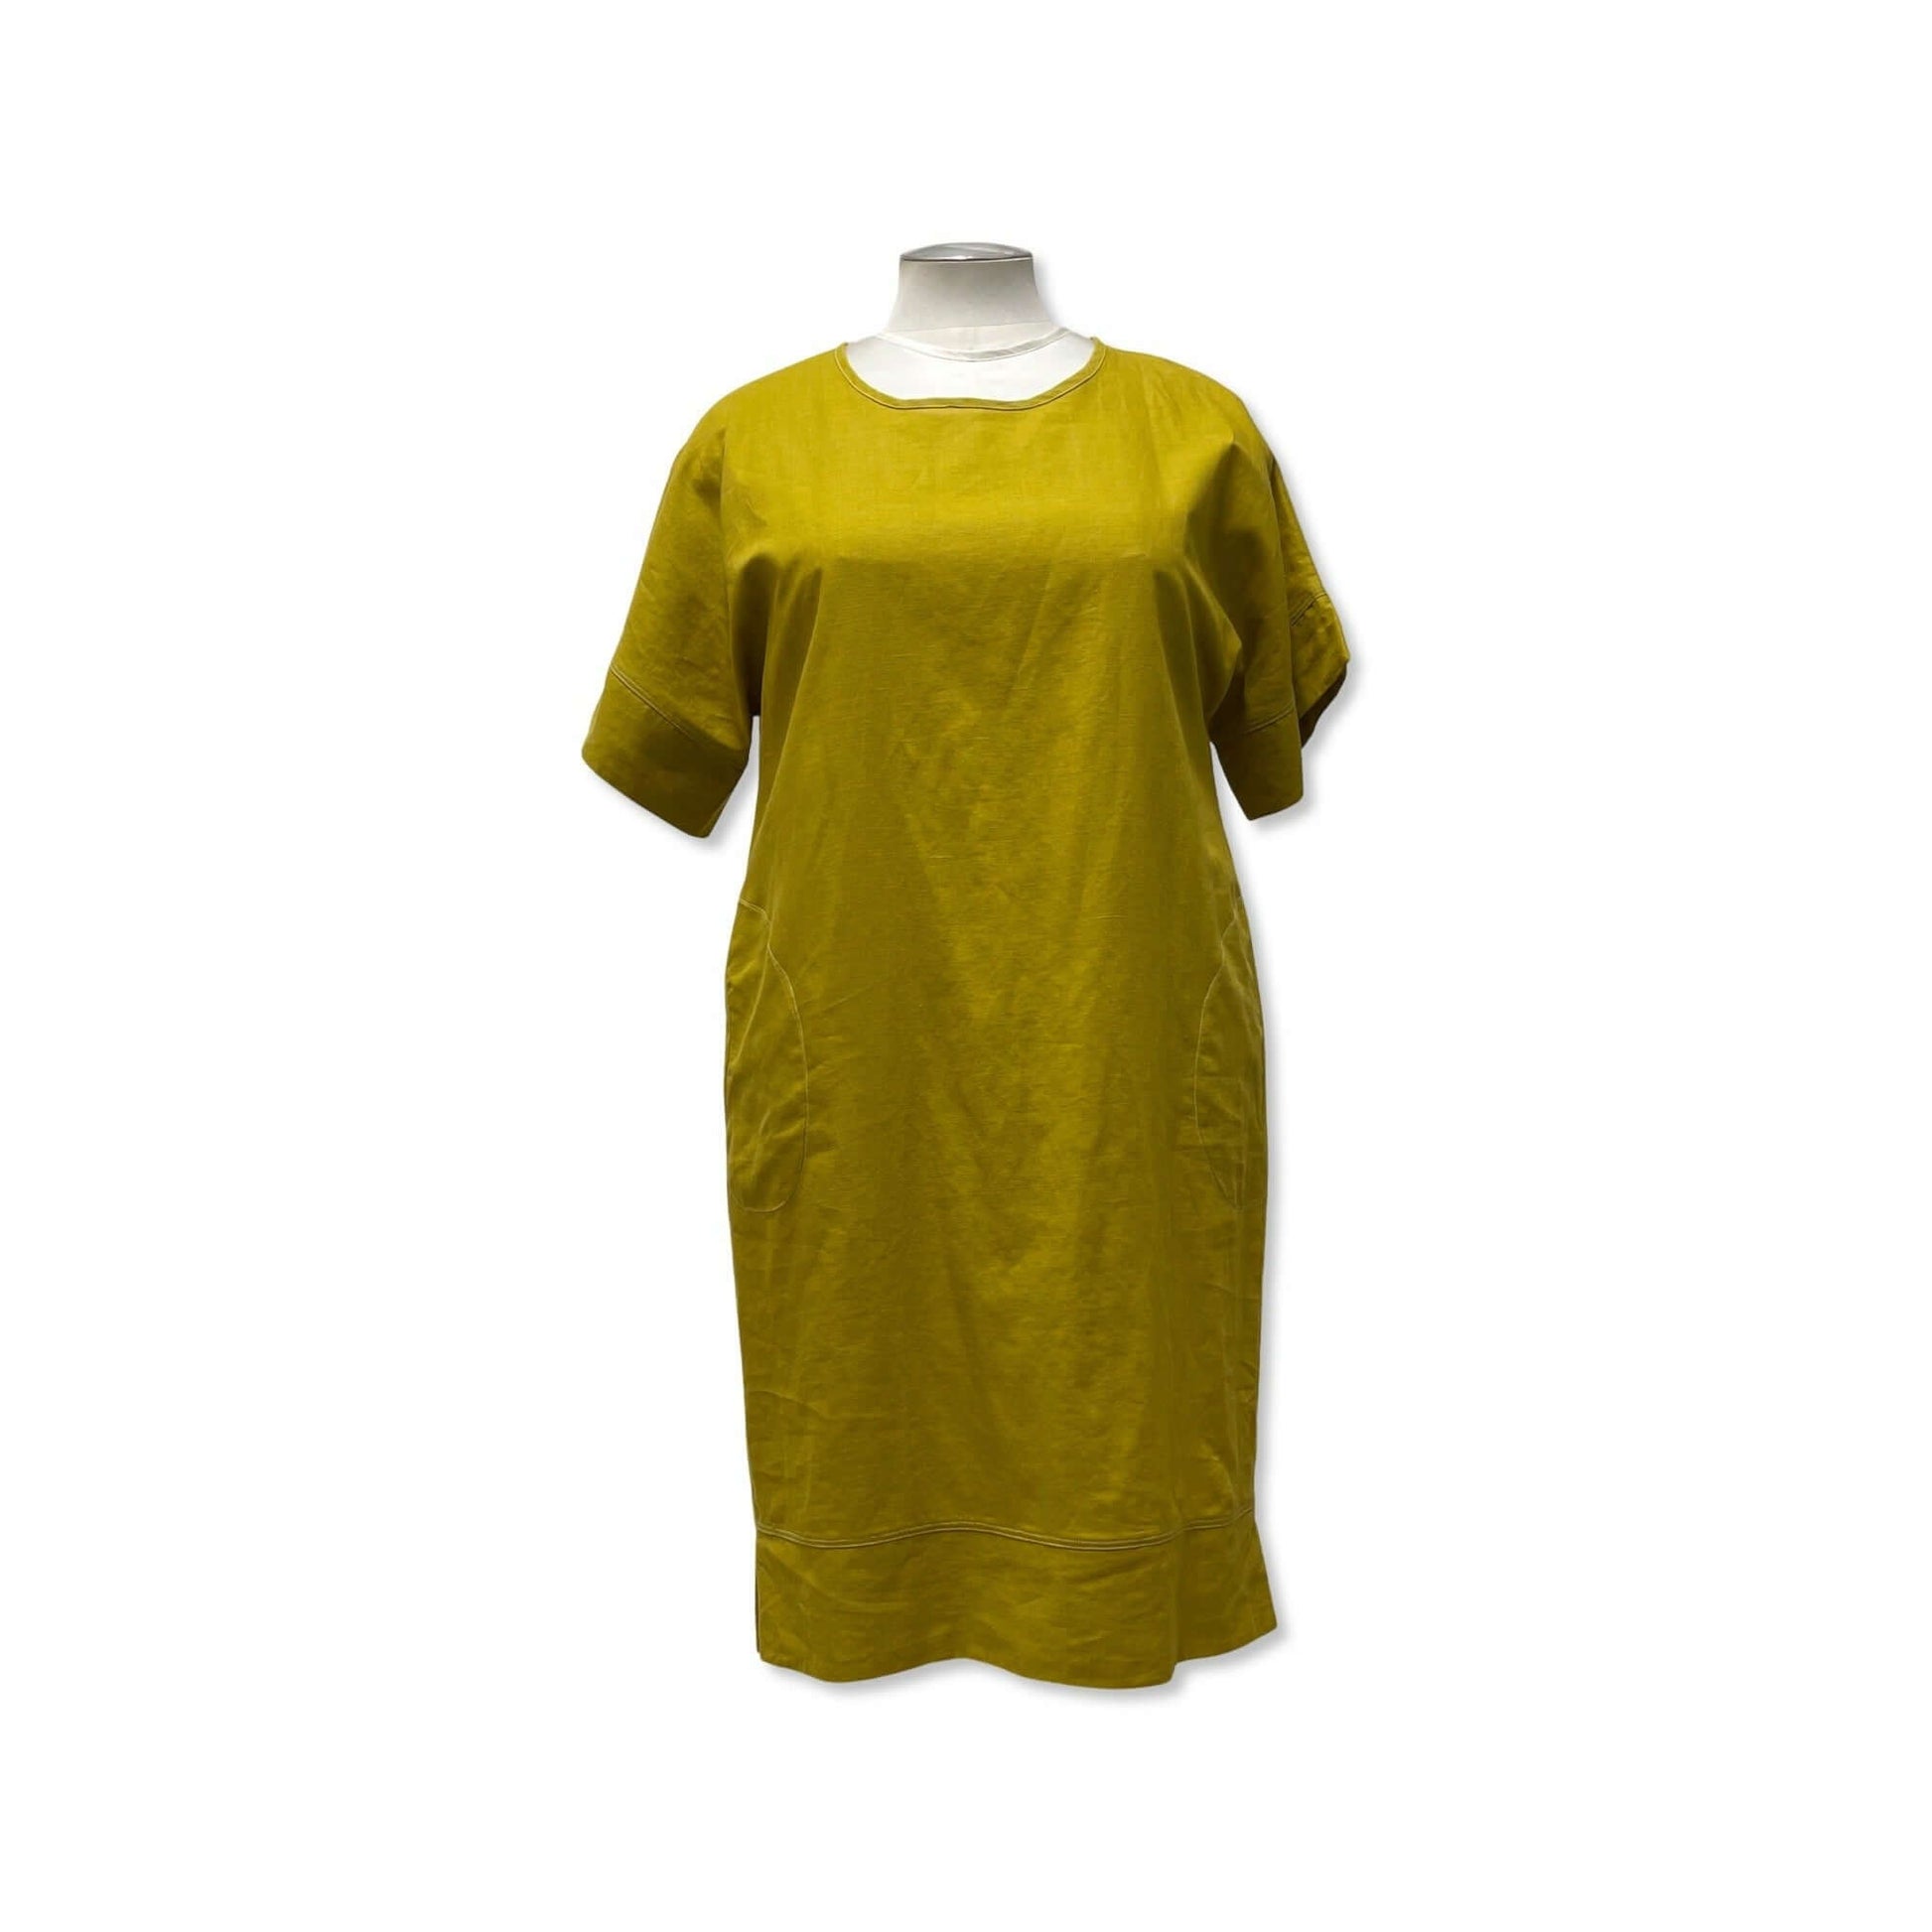 Bloom Clothing NZ,SPLIT THE DIFFERENCE DRESS - Pear,$279.00,